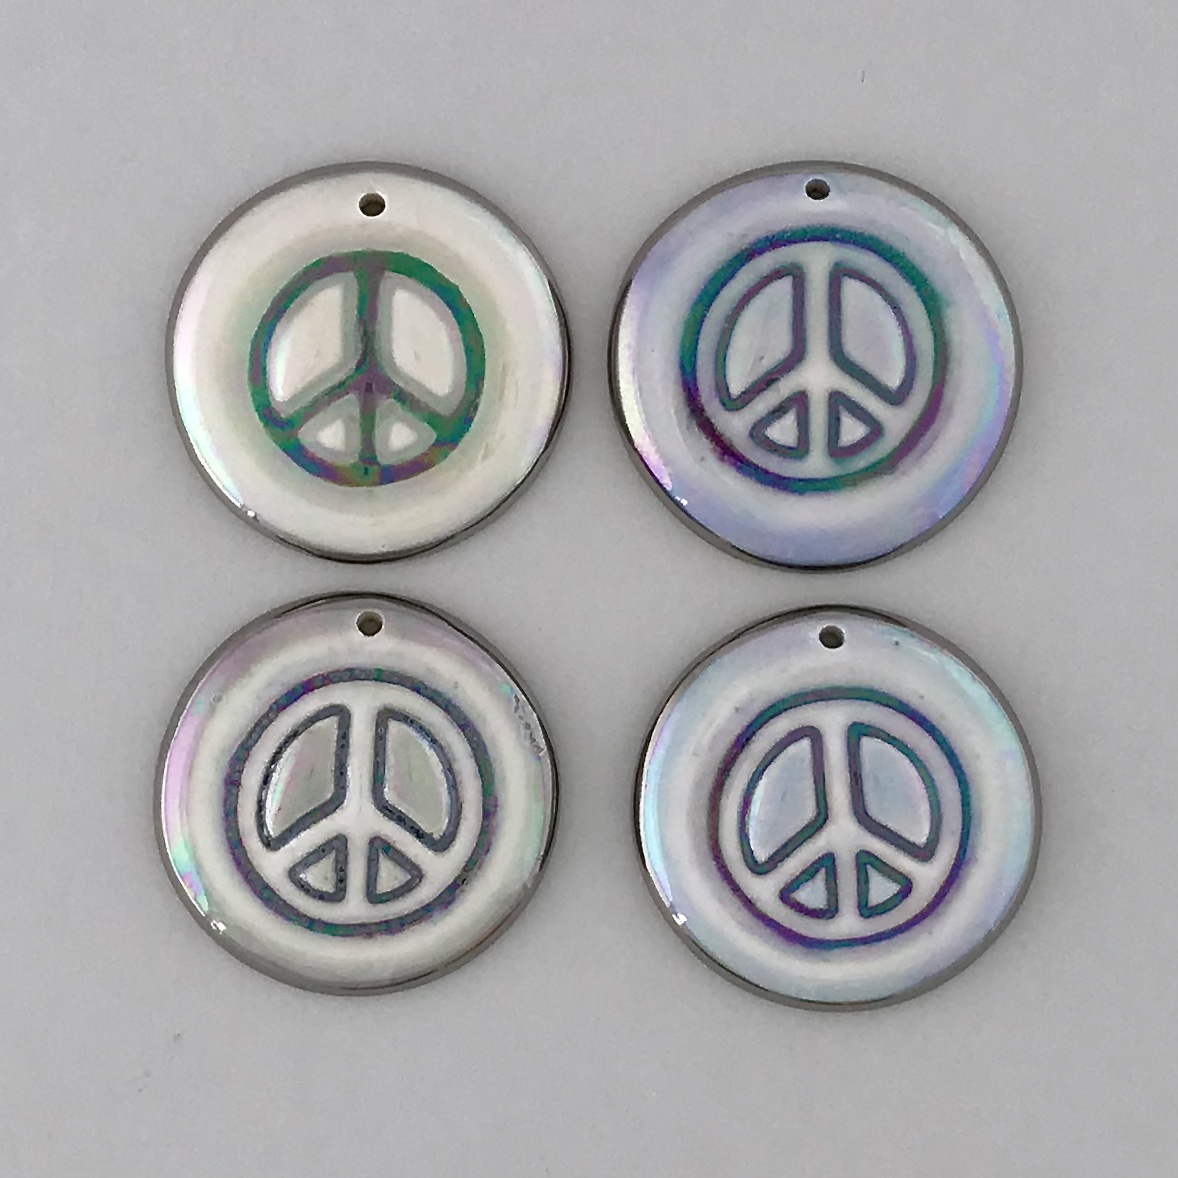 Peace signs never go out of style, matching earrings available.